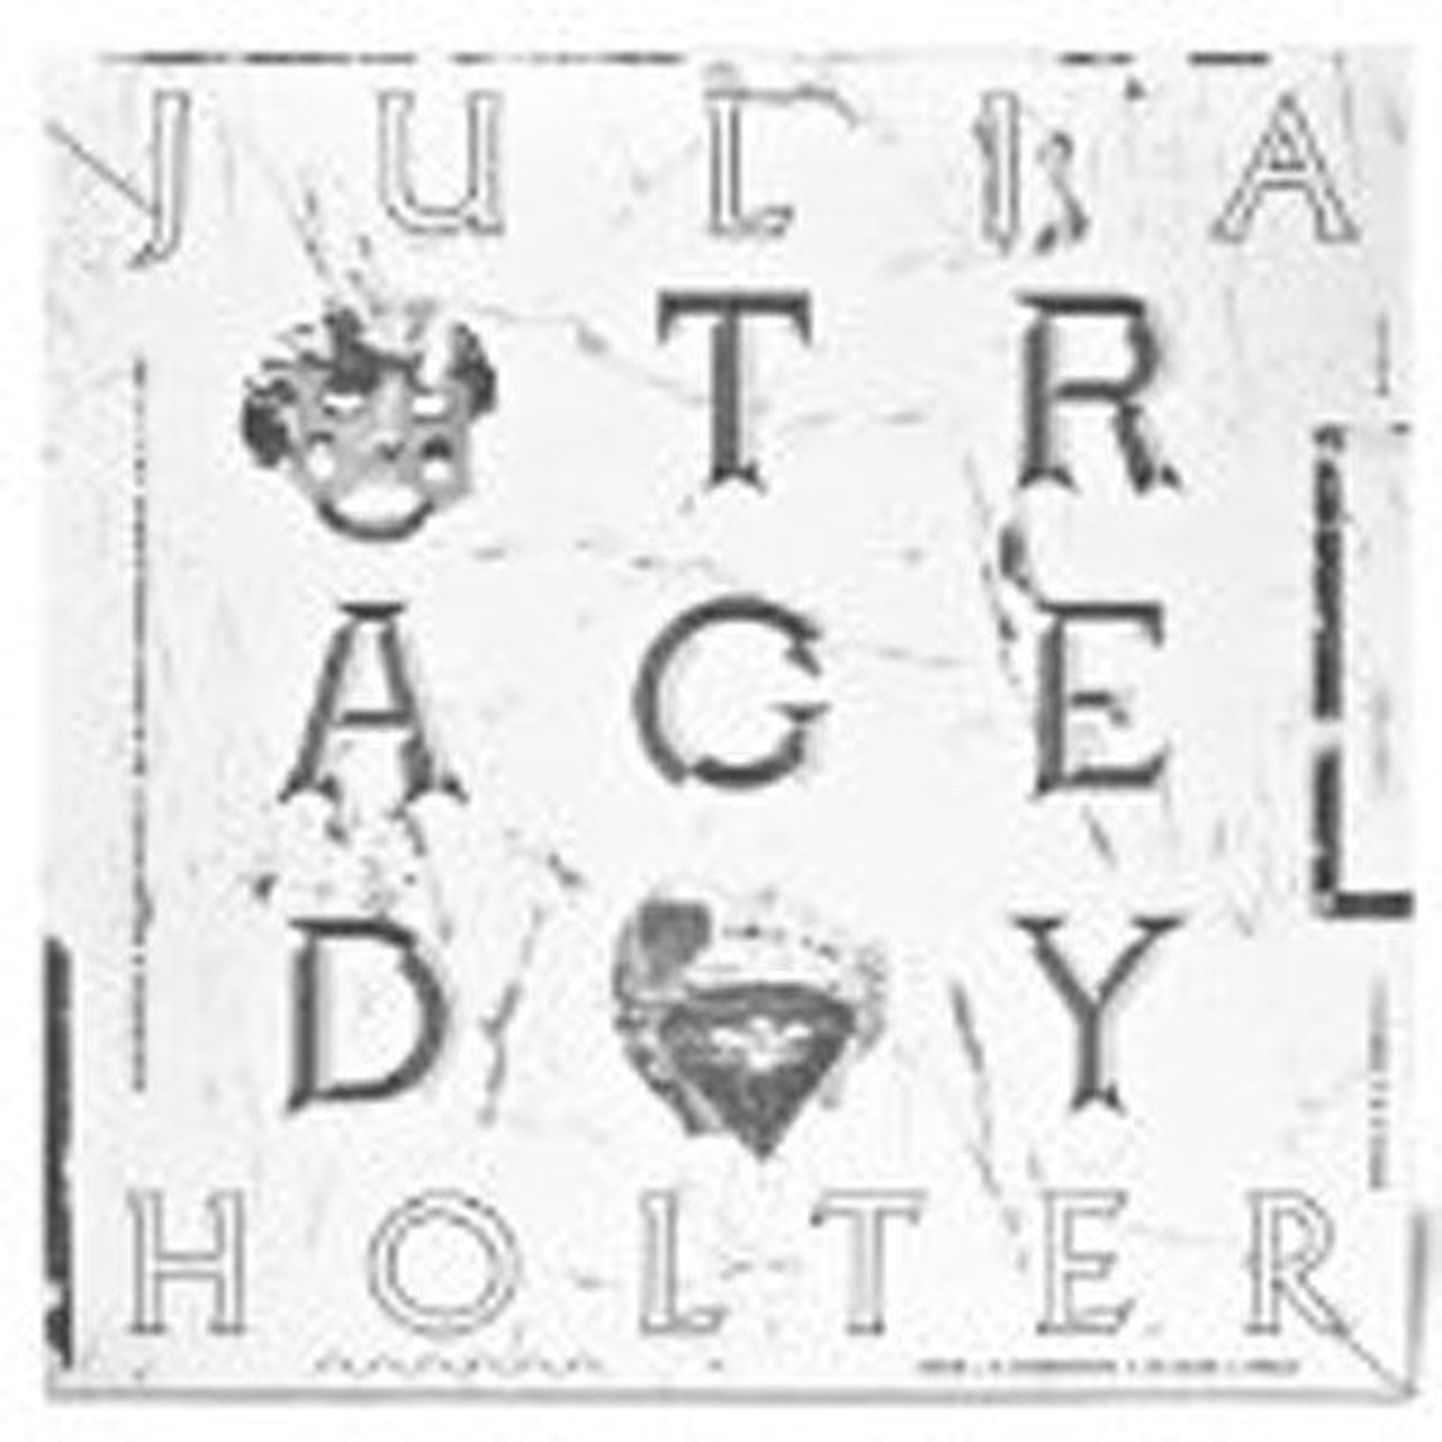 Julia Holter
Tragedy 
(Leaving)